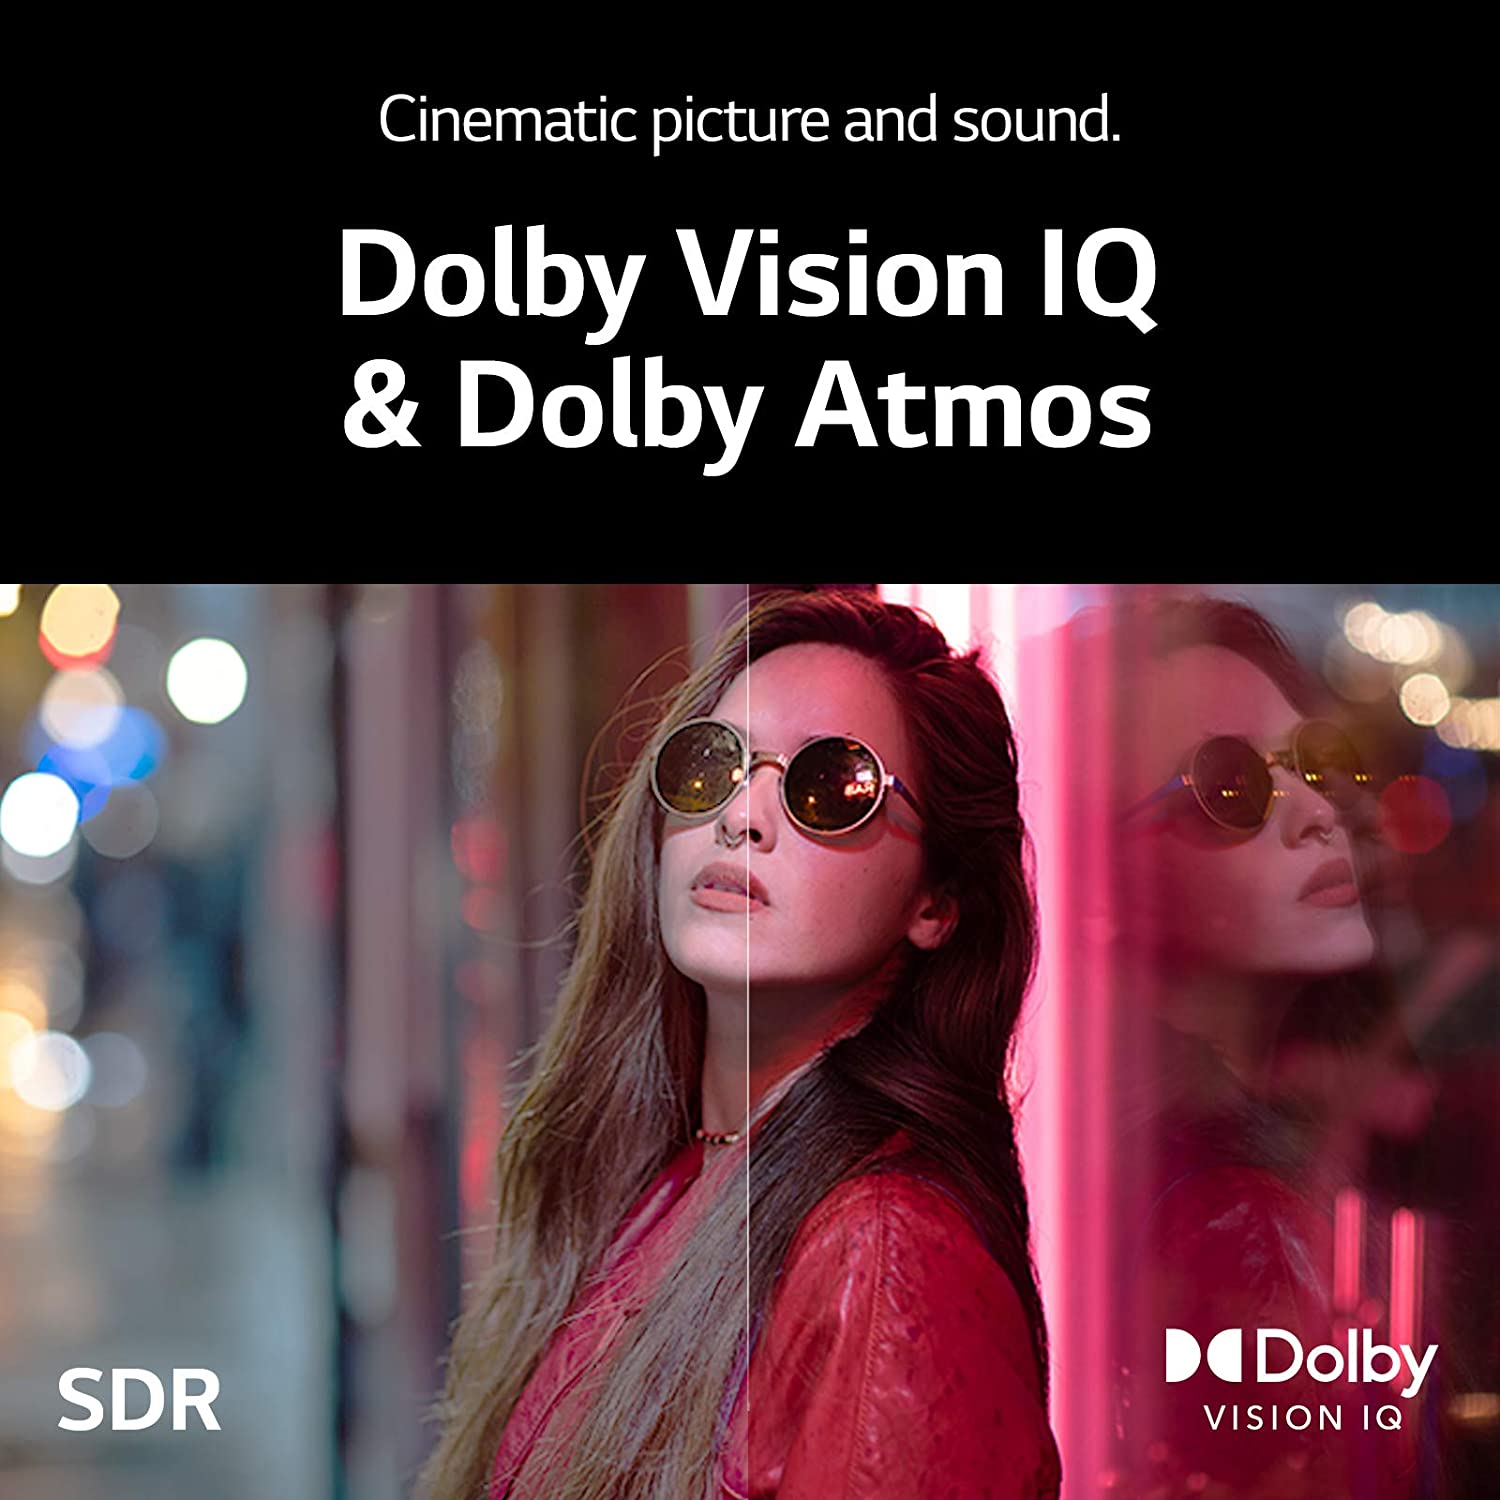 LG G1 Specifications dolby vision